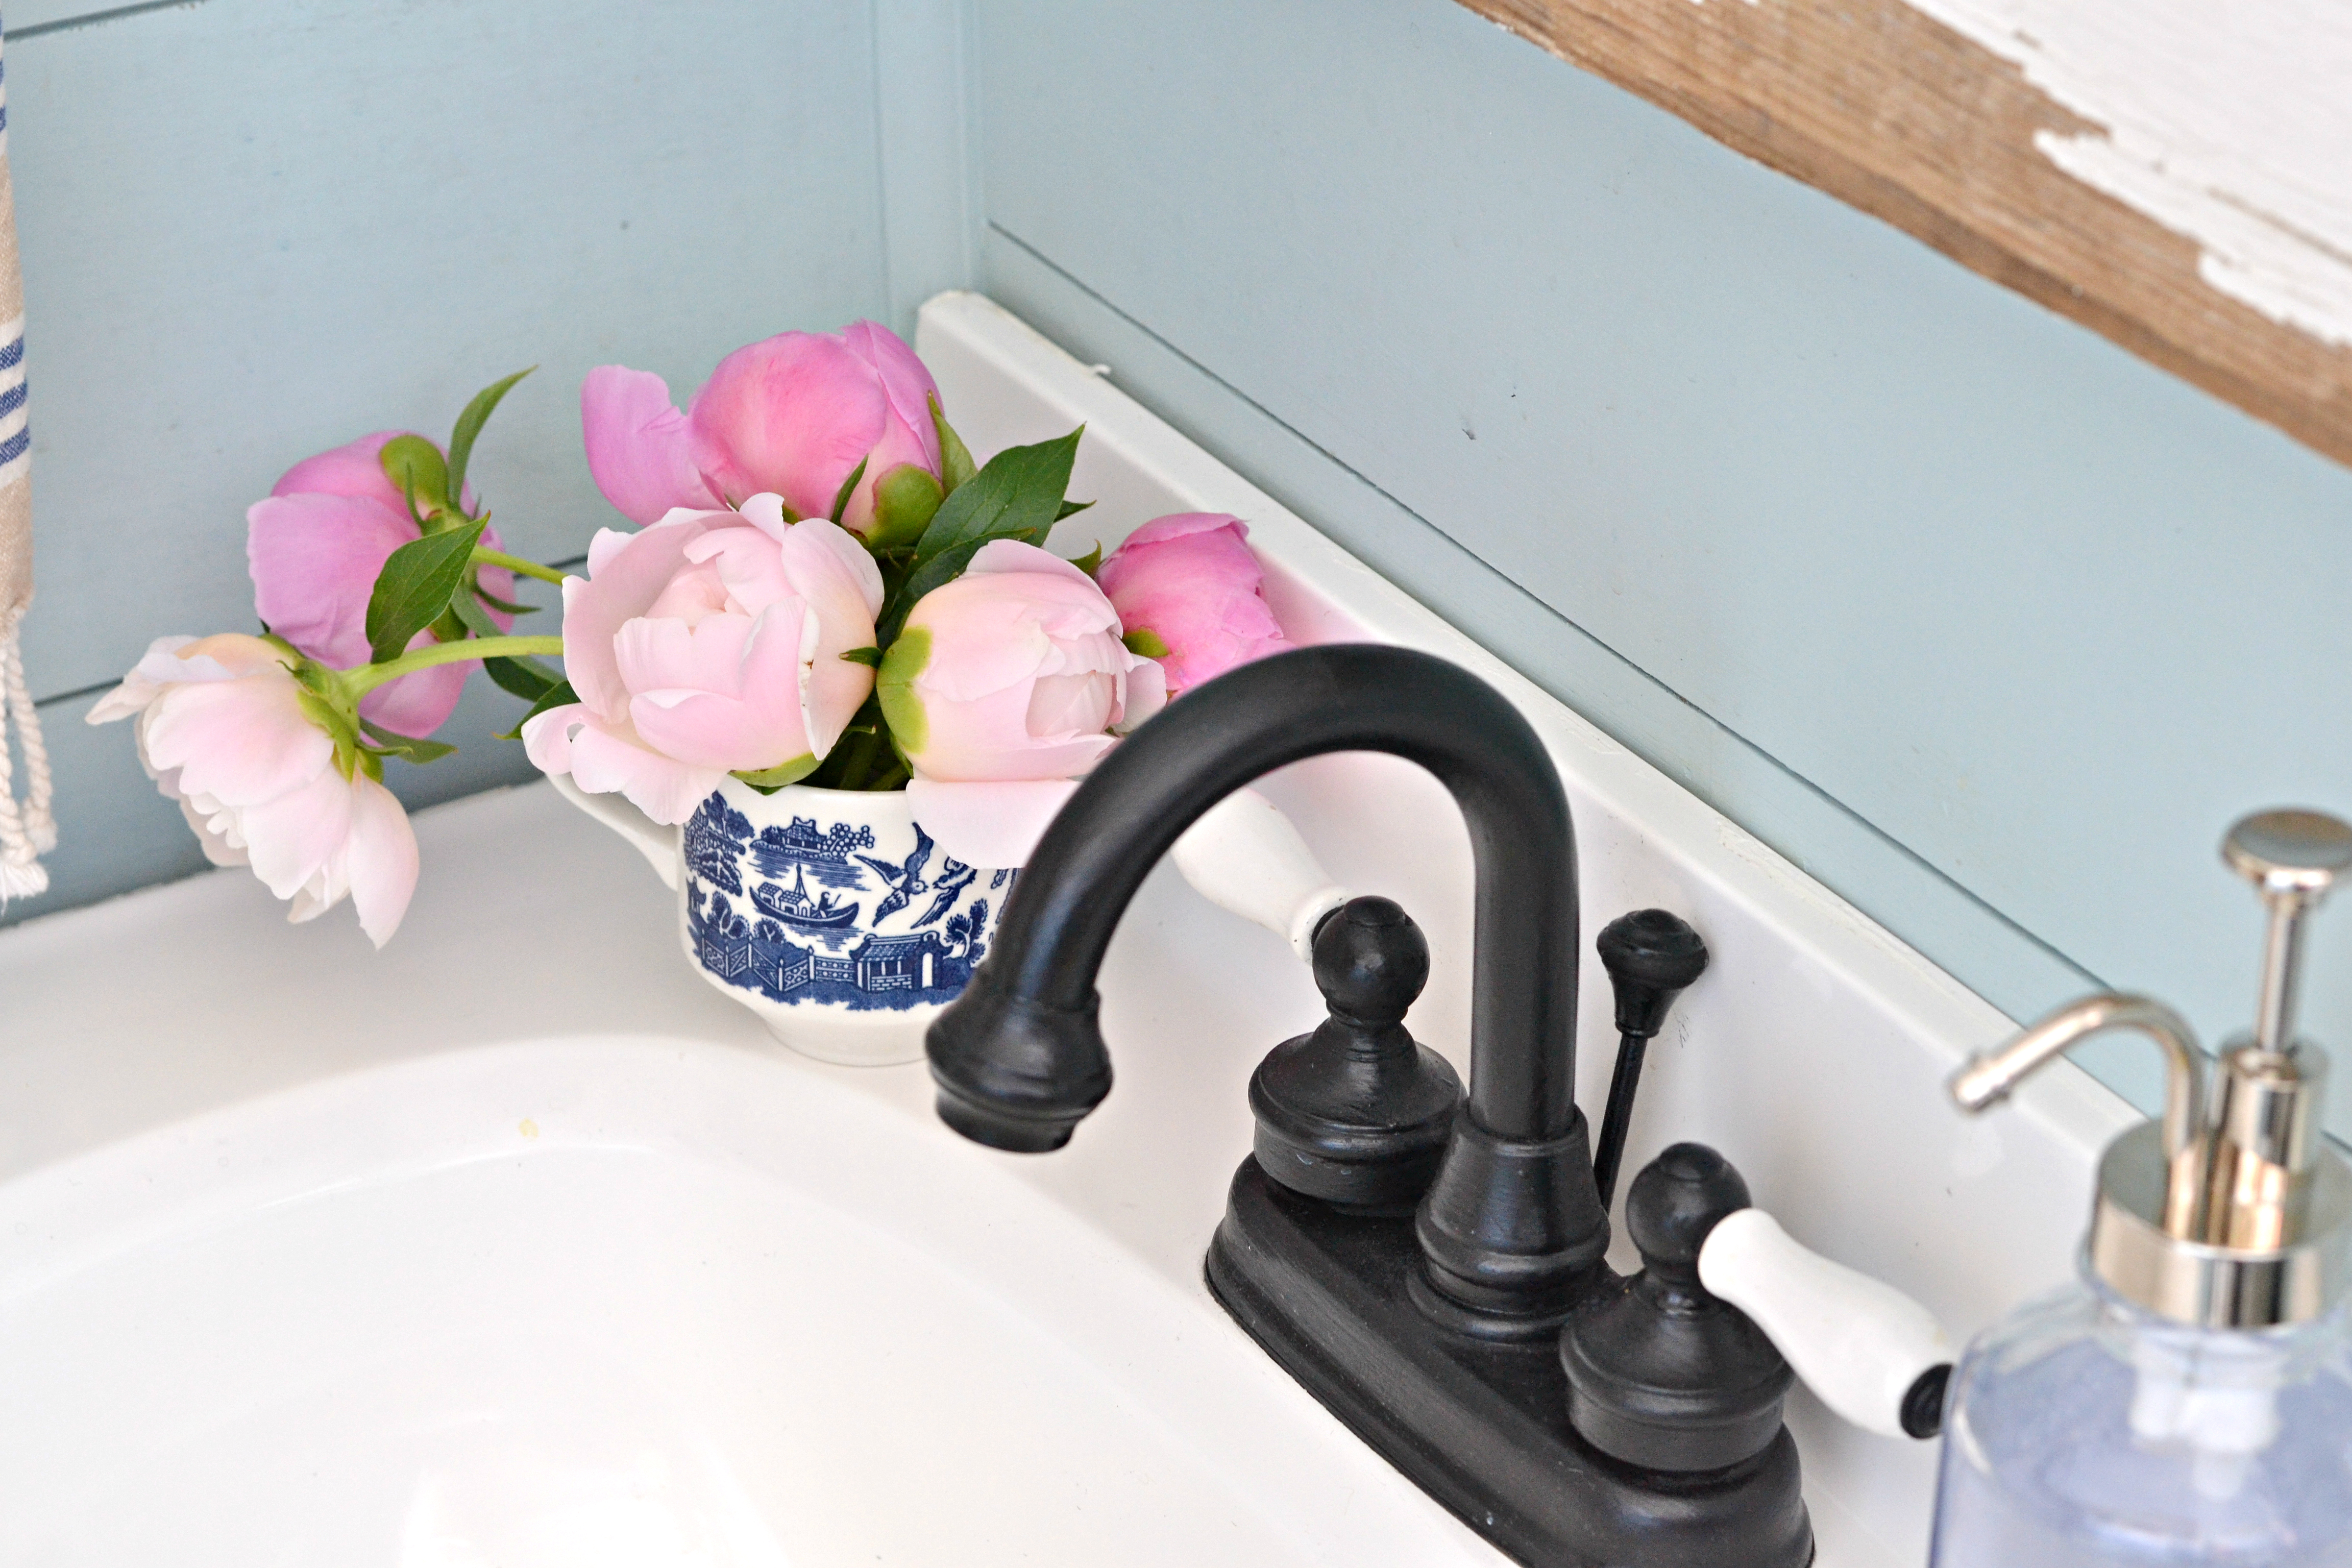 Add value to your home with this quick and easy painted faucet bathroom upgrade